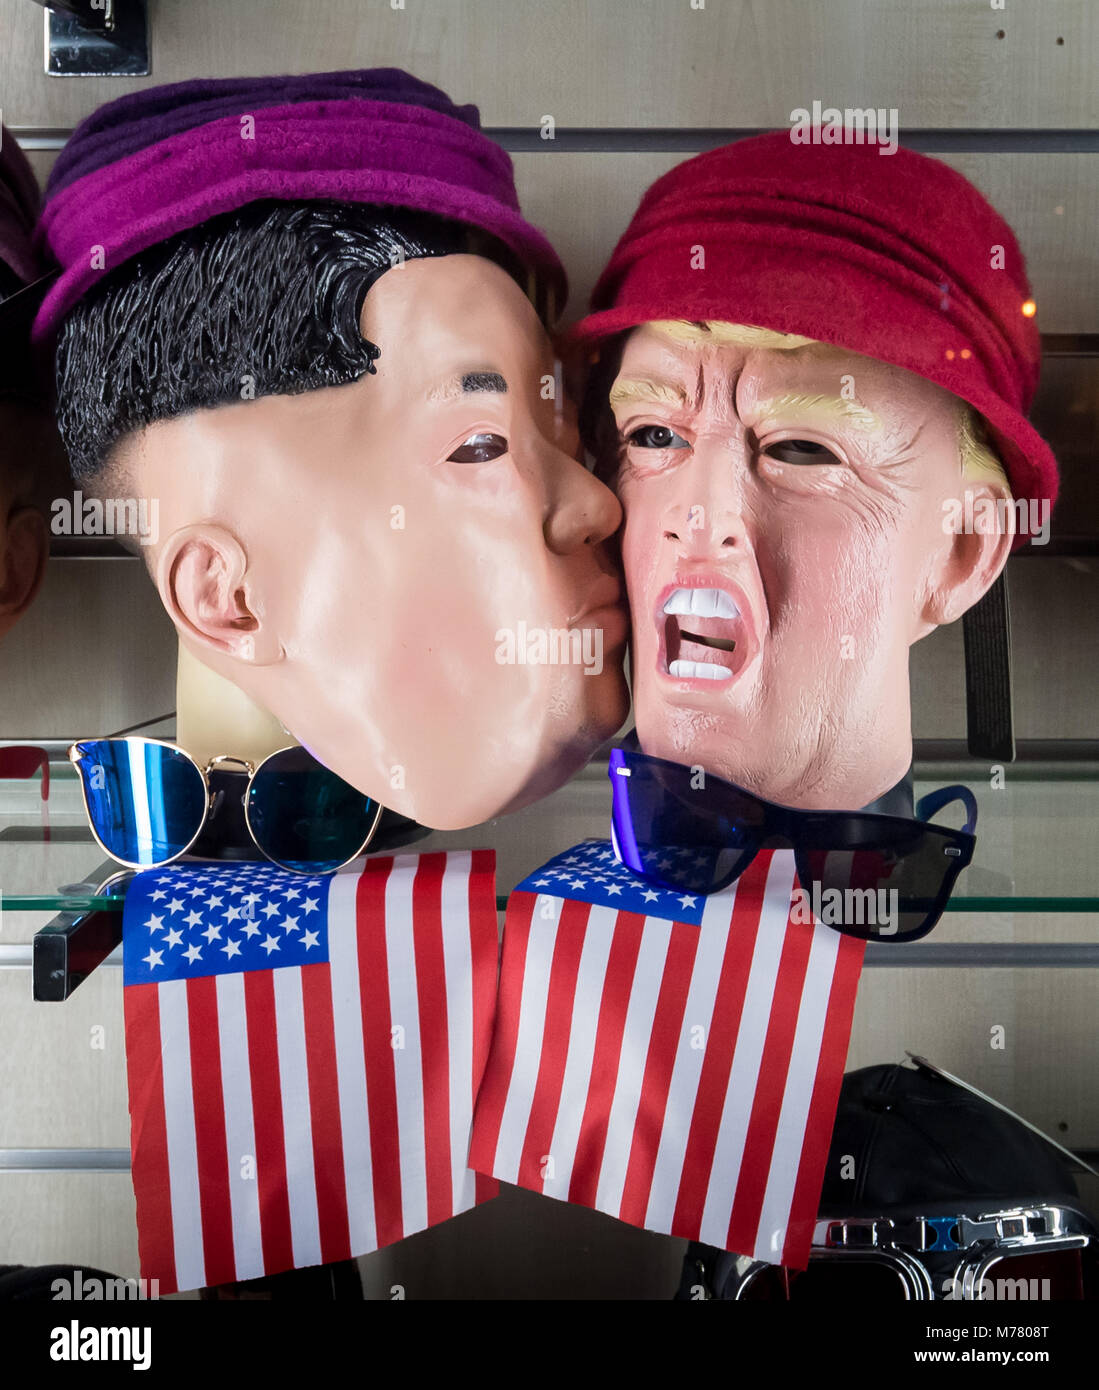 London, UK. 22nd Jan, 2018. Kim Jong-un and Donald Trump face masks are arranged provocatively in a west London shop window. Credit: Guy Corbishley/Alamy Live News Stock Photo